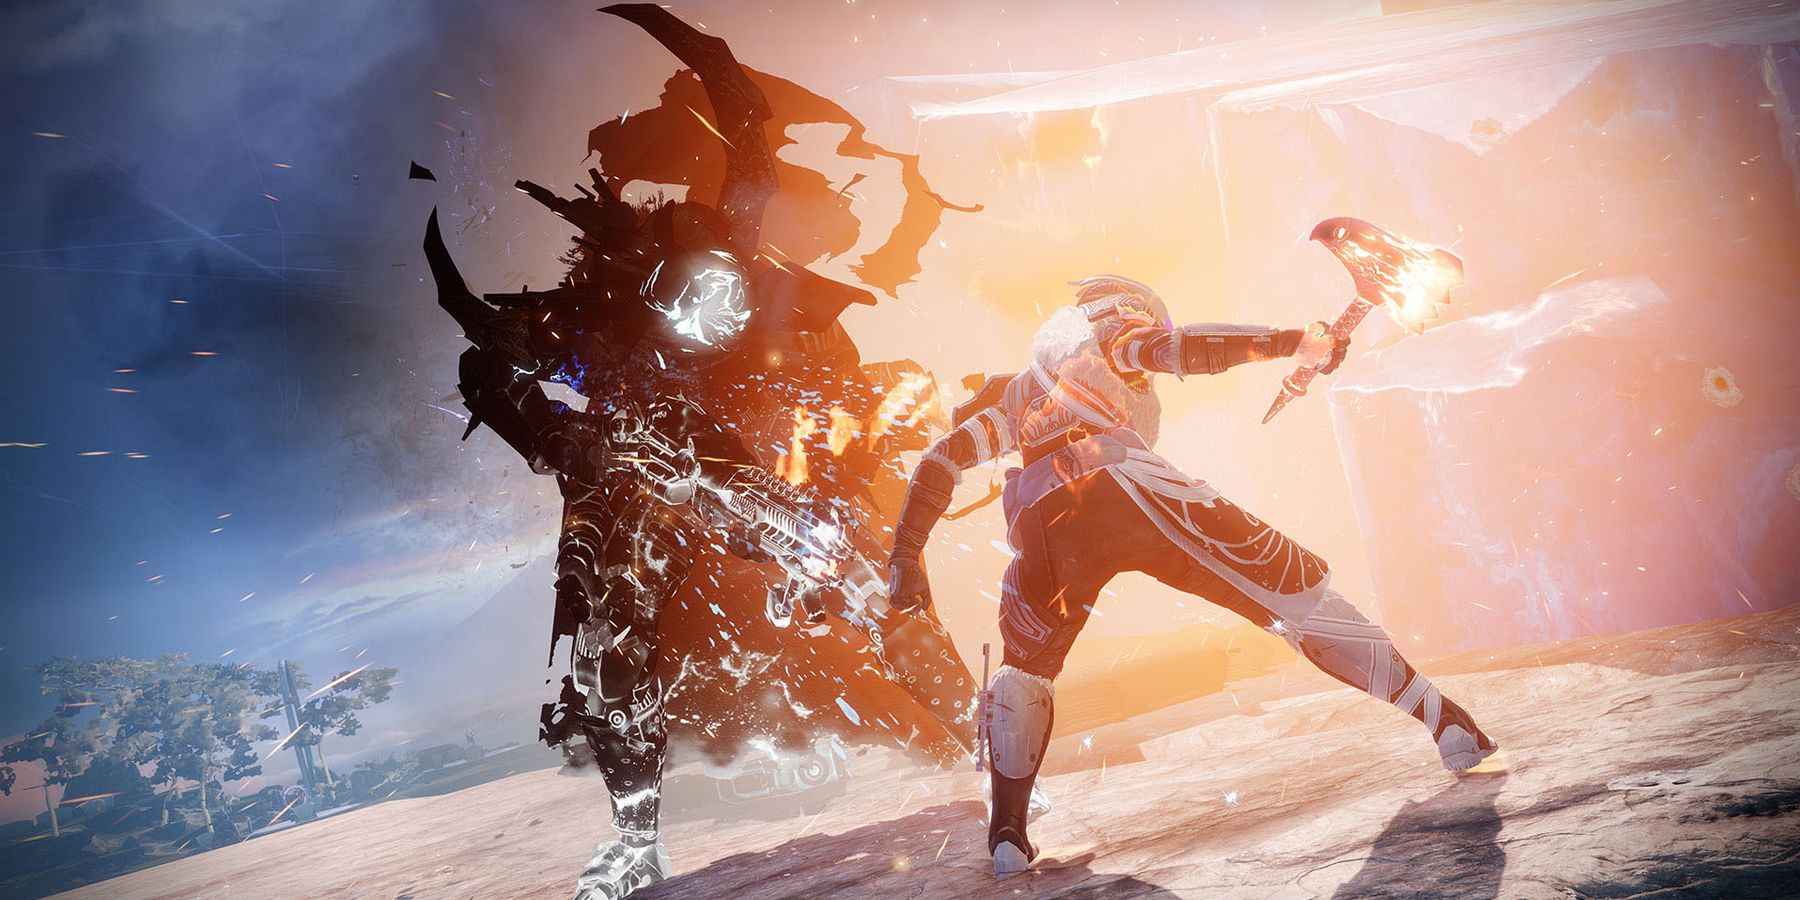 A Titan uses Hammer Strike on a Taken Captain during an Astral Alignment activity in Destiny 2.